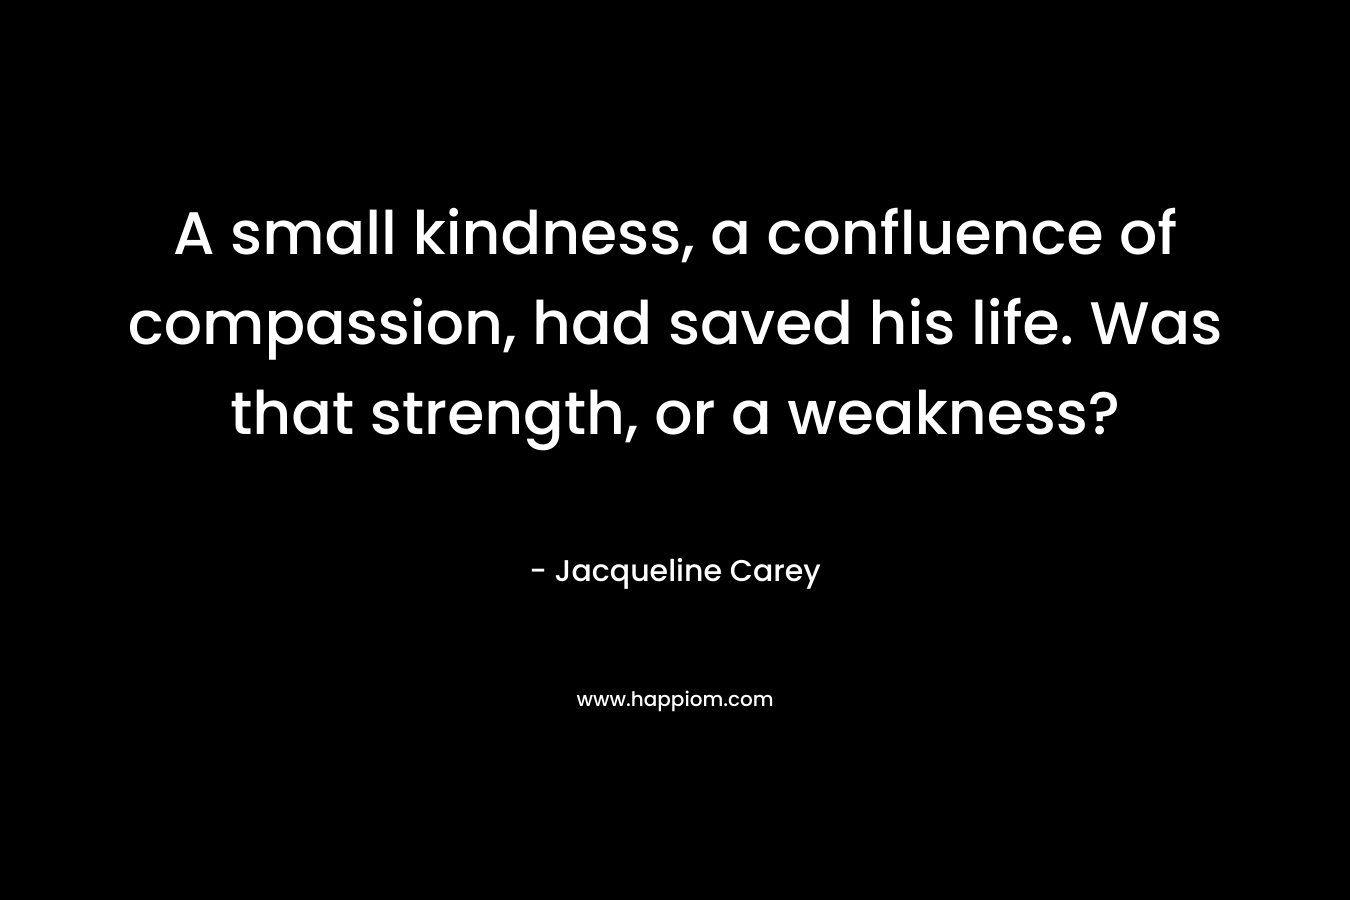 A small kindness, a confluence of compassion, had saved his life. Was that strength, or a weakness? – Jacqueline Carey